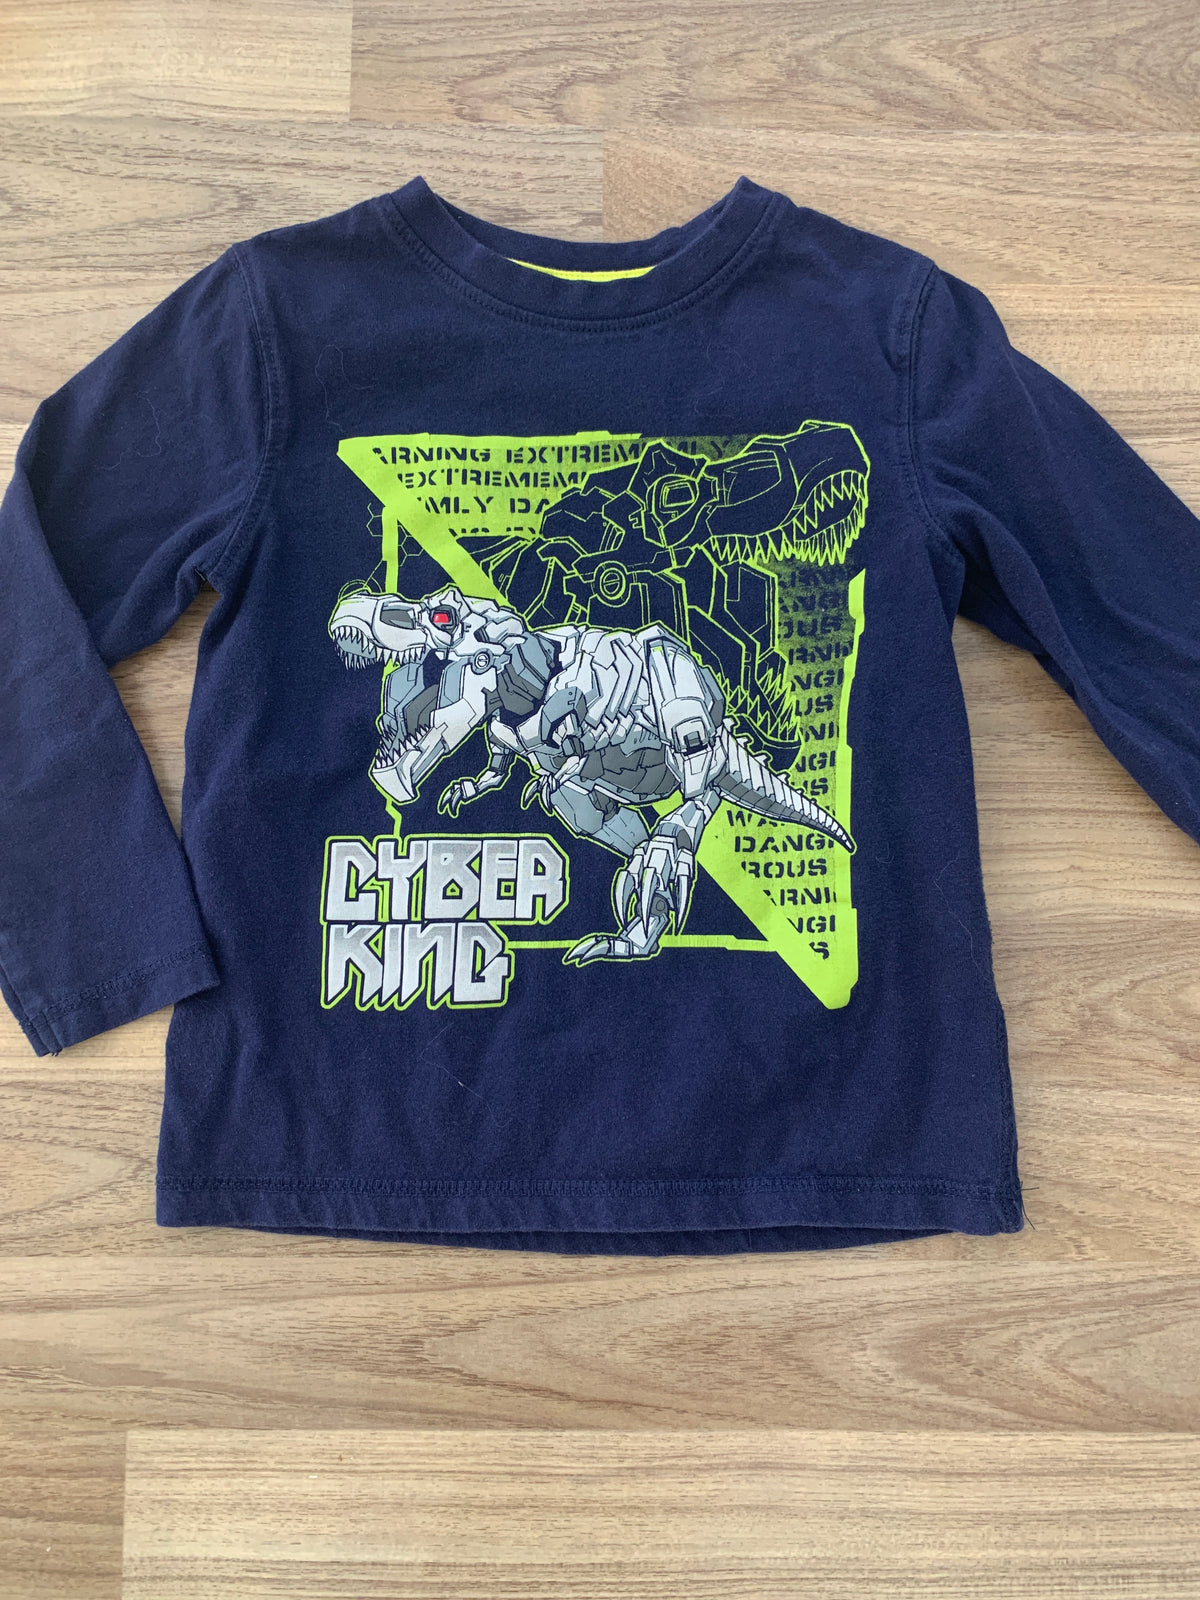 Long Sleeve Graphic Top (Boys Size 4)